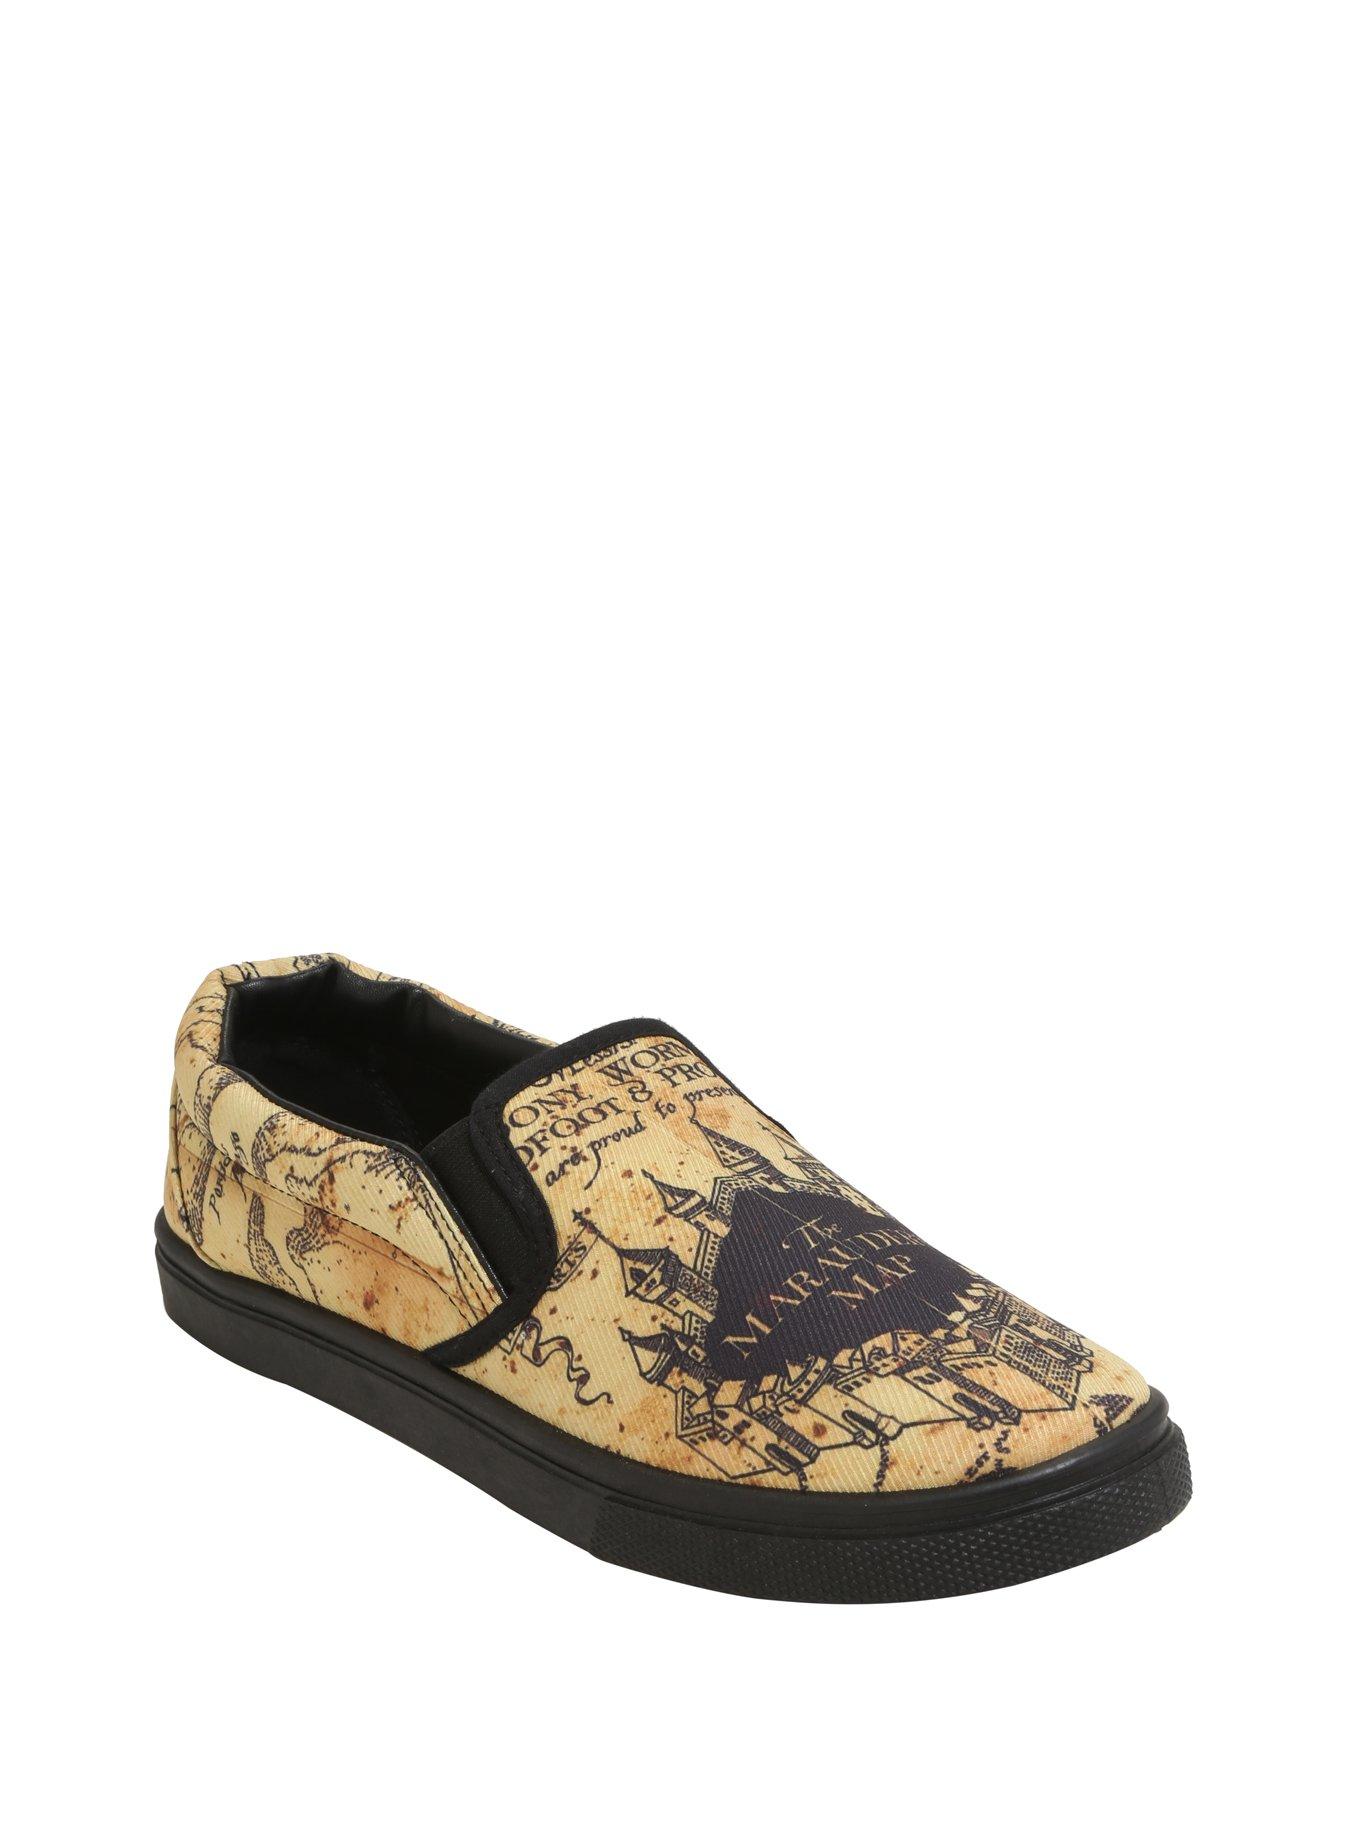 Harry Potter Marauder's Map Slip-On Sneakers | Hot Topic